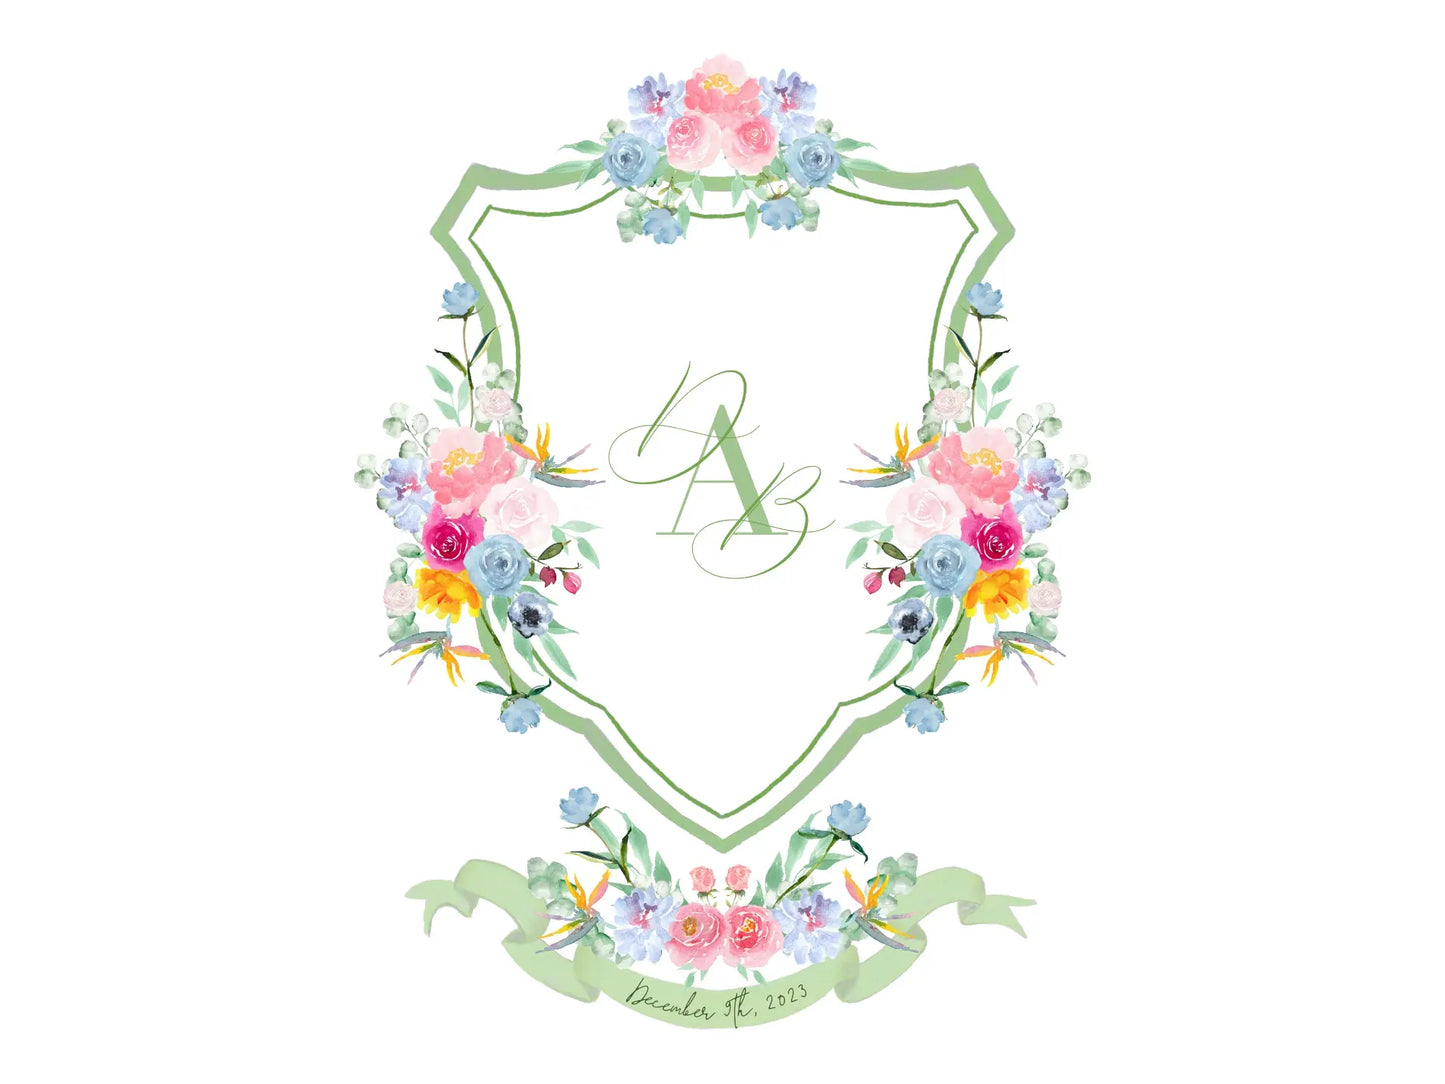 Sage wedding crest with colorfull watercolor flowers The Wedding Crest Lab